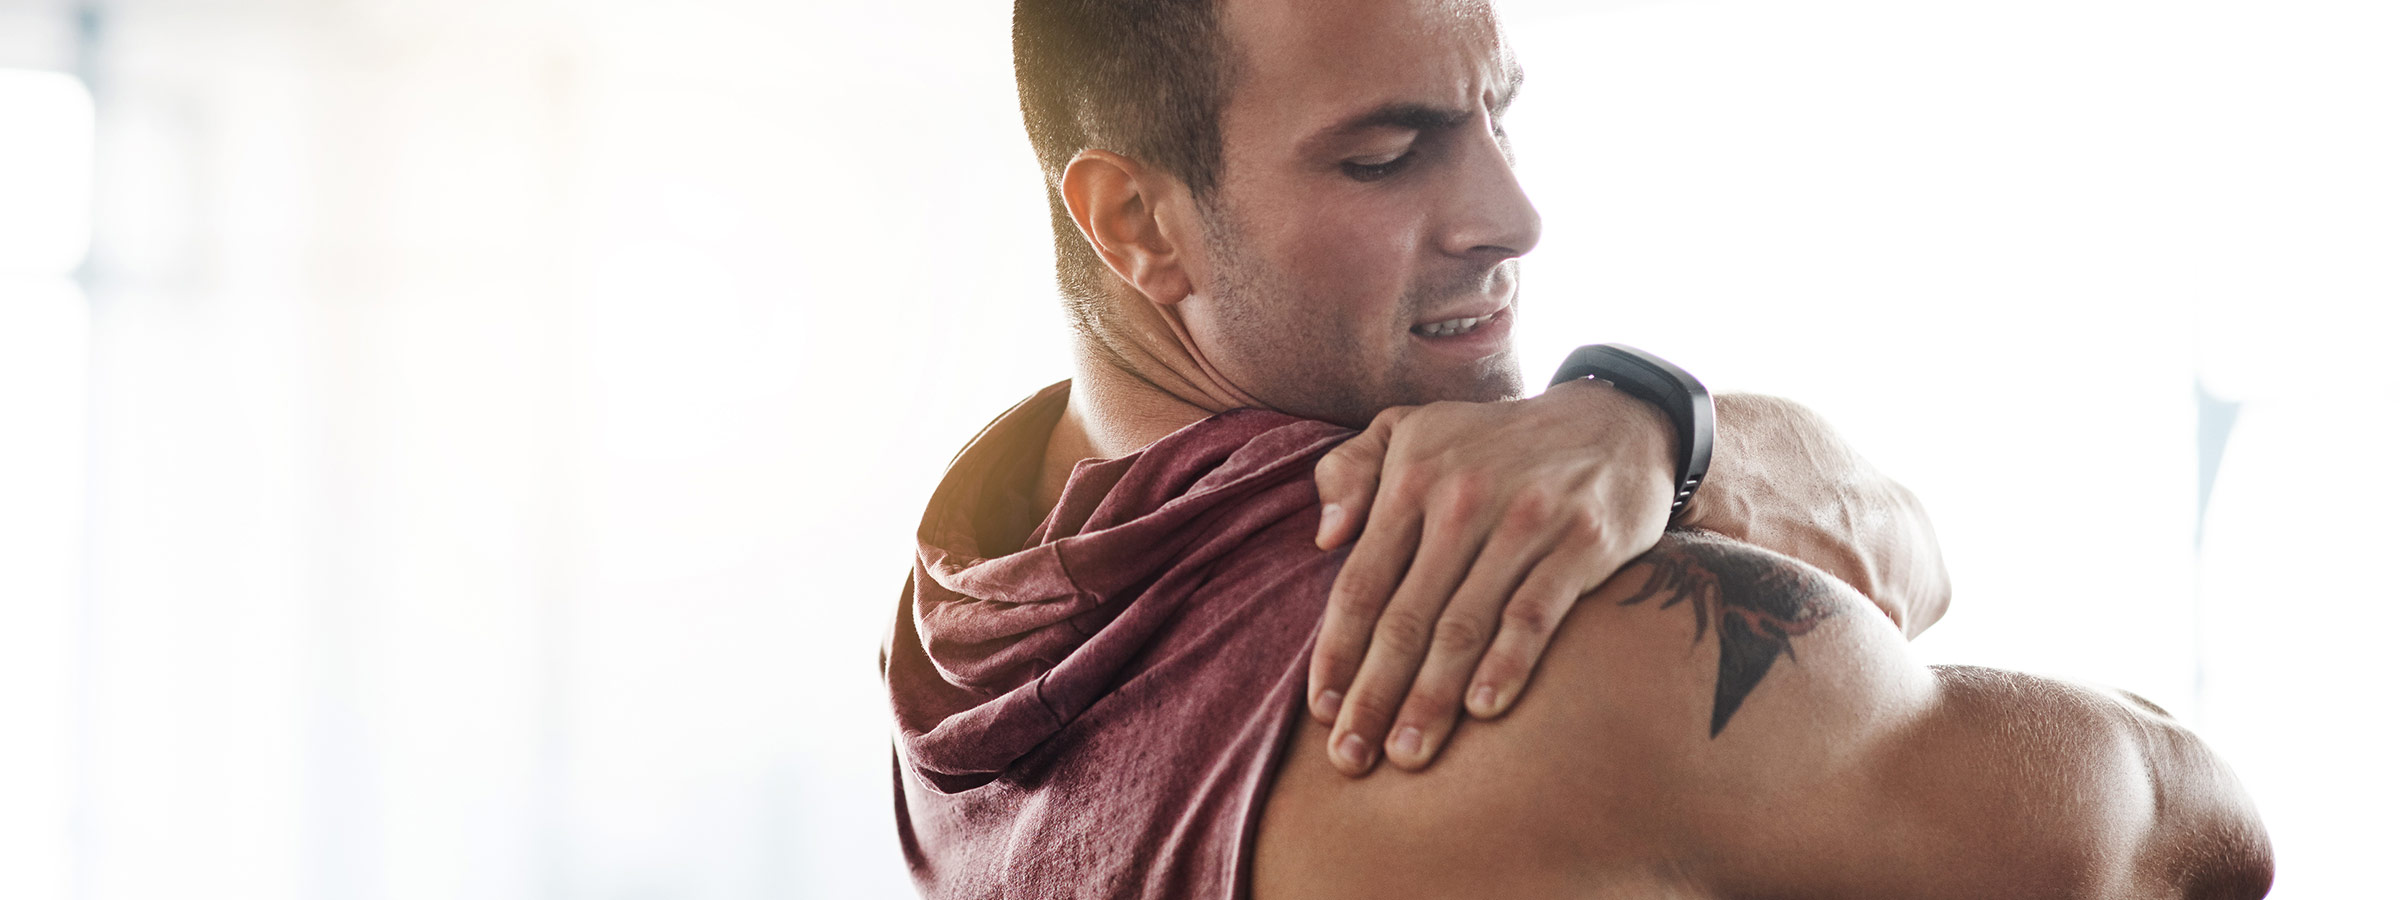 light-skinned, male presenting person rubbing oil on shoulder